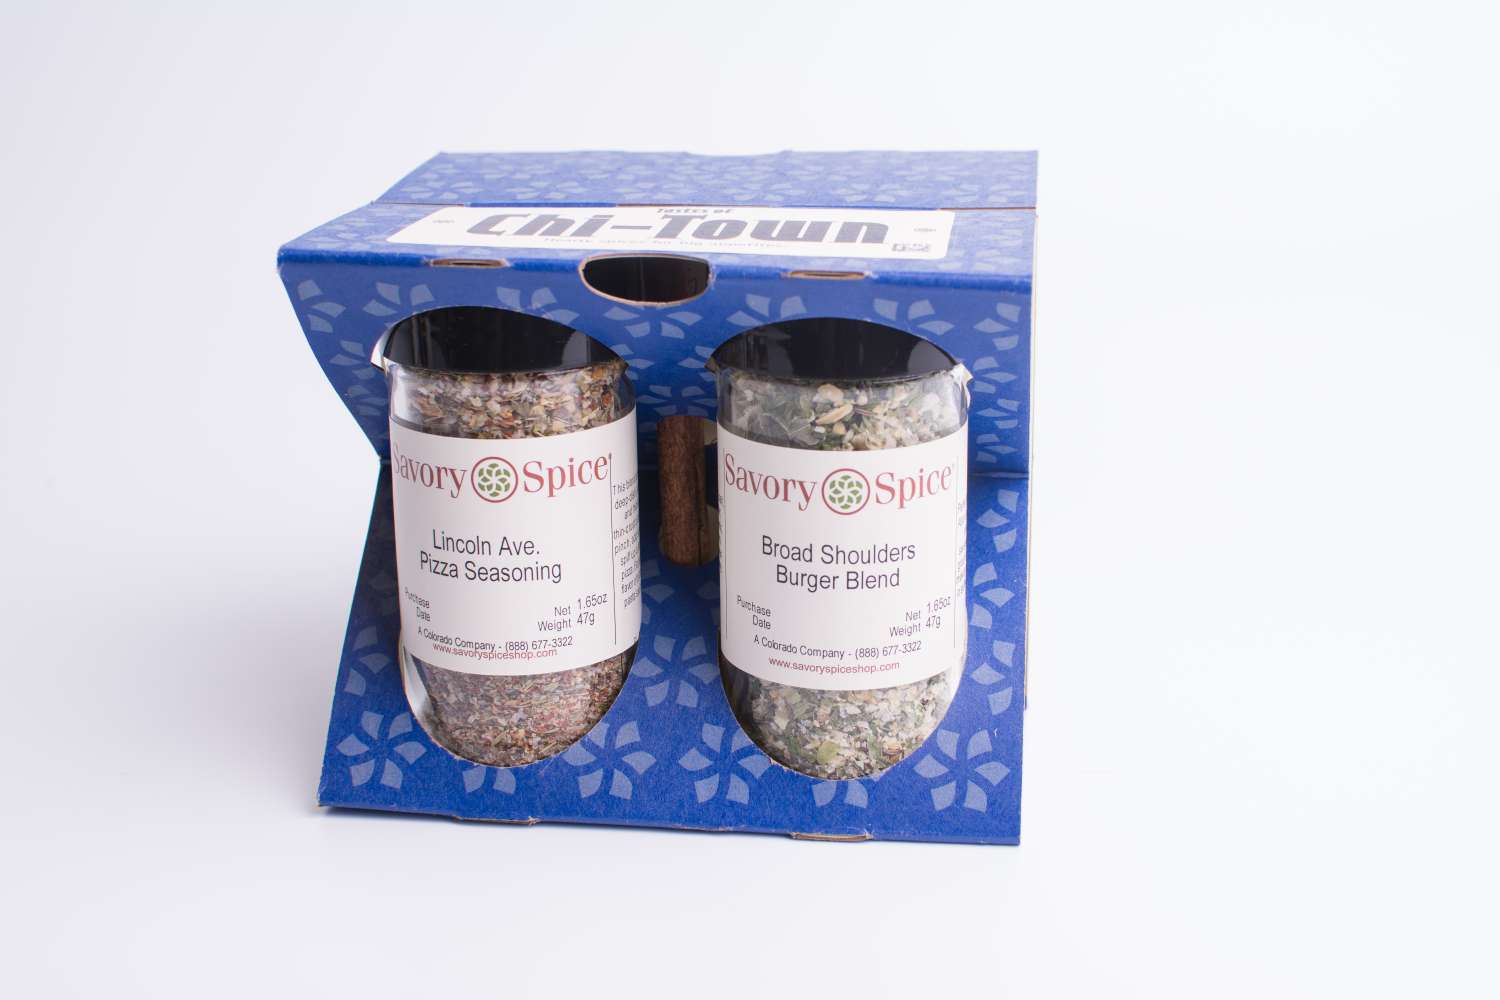 The Savory Spice Chi-Town gift set is one of several locally themed items featuring seasoning blends with names and flavors reflecting their Chicagoland roots.